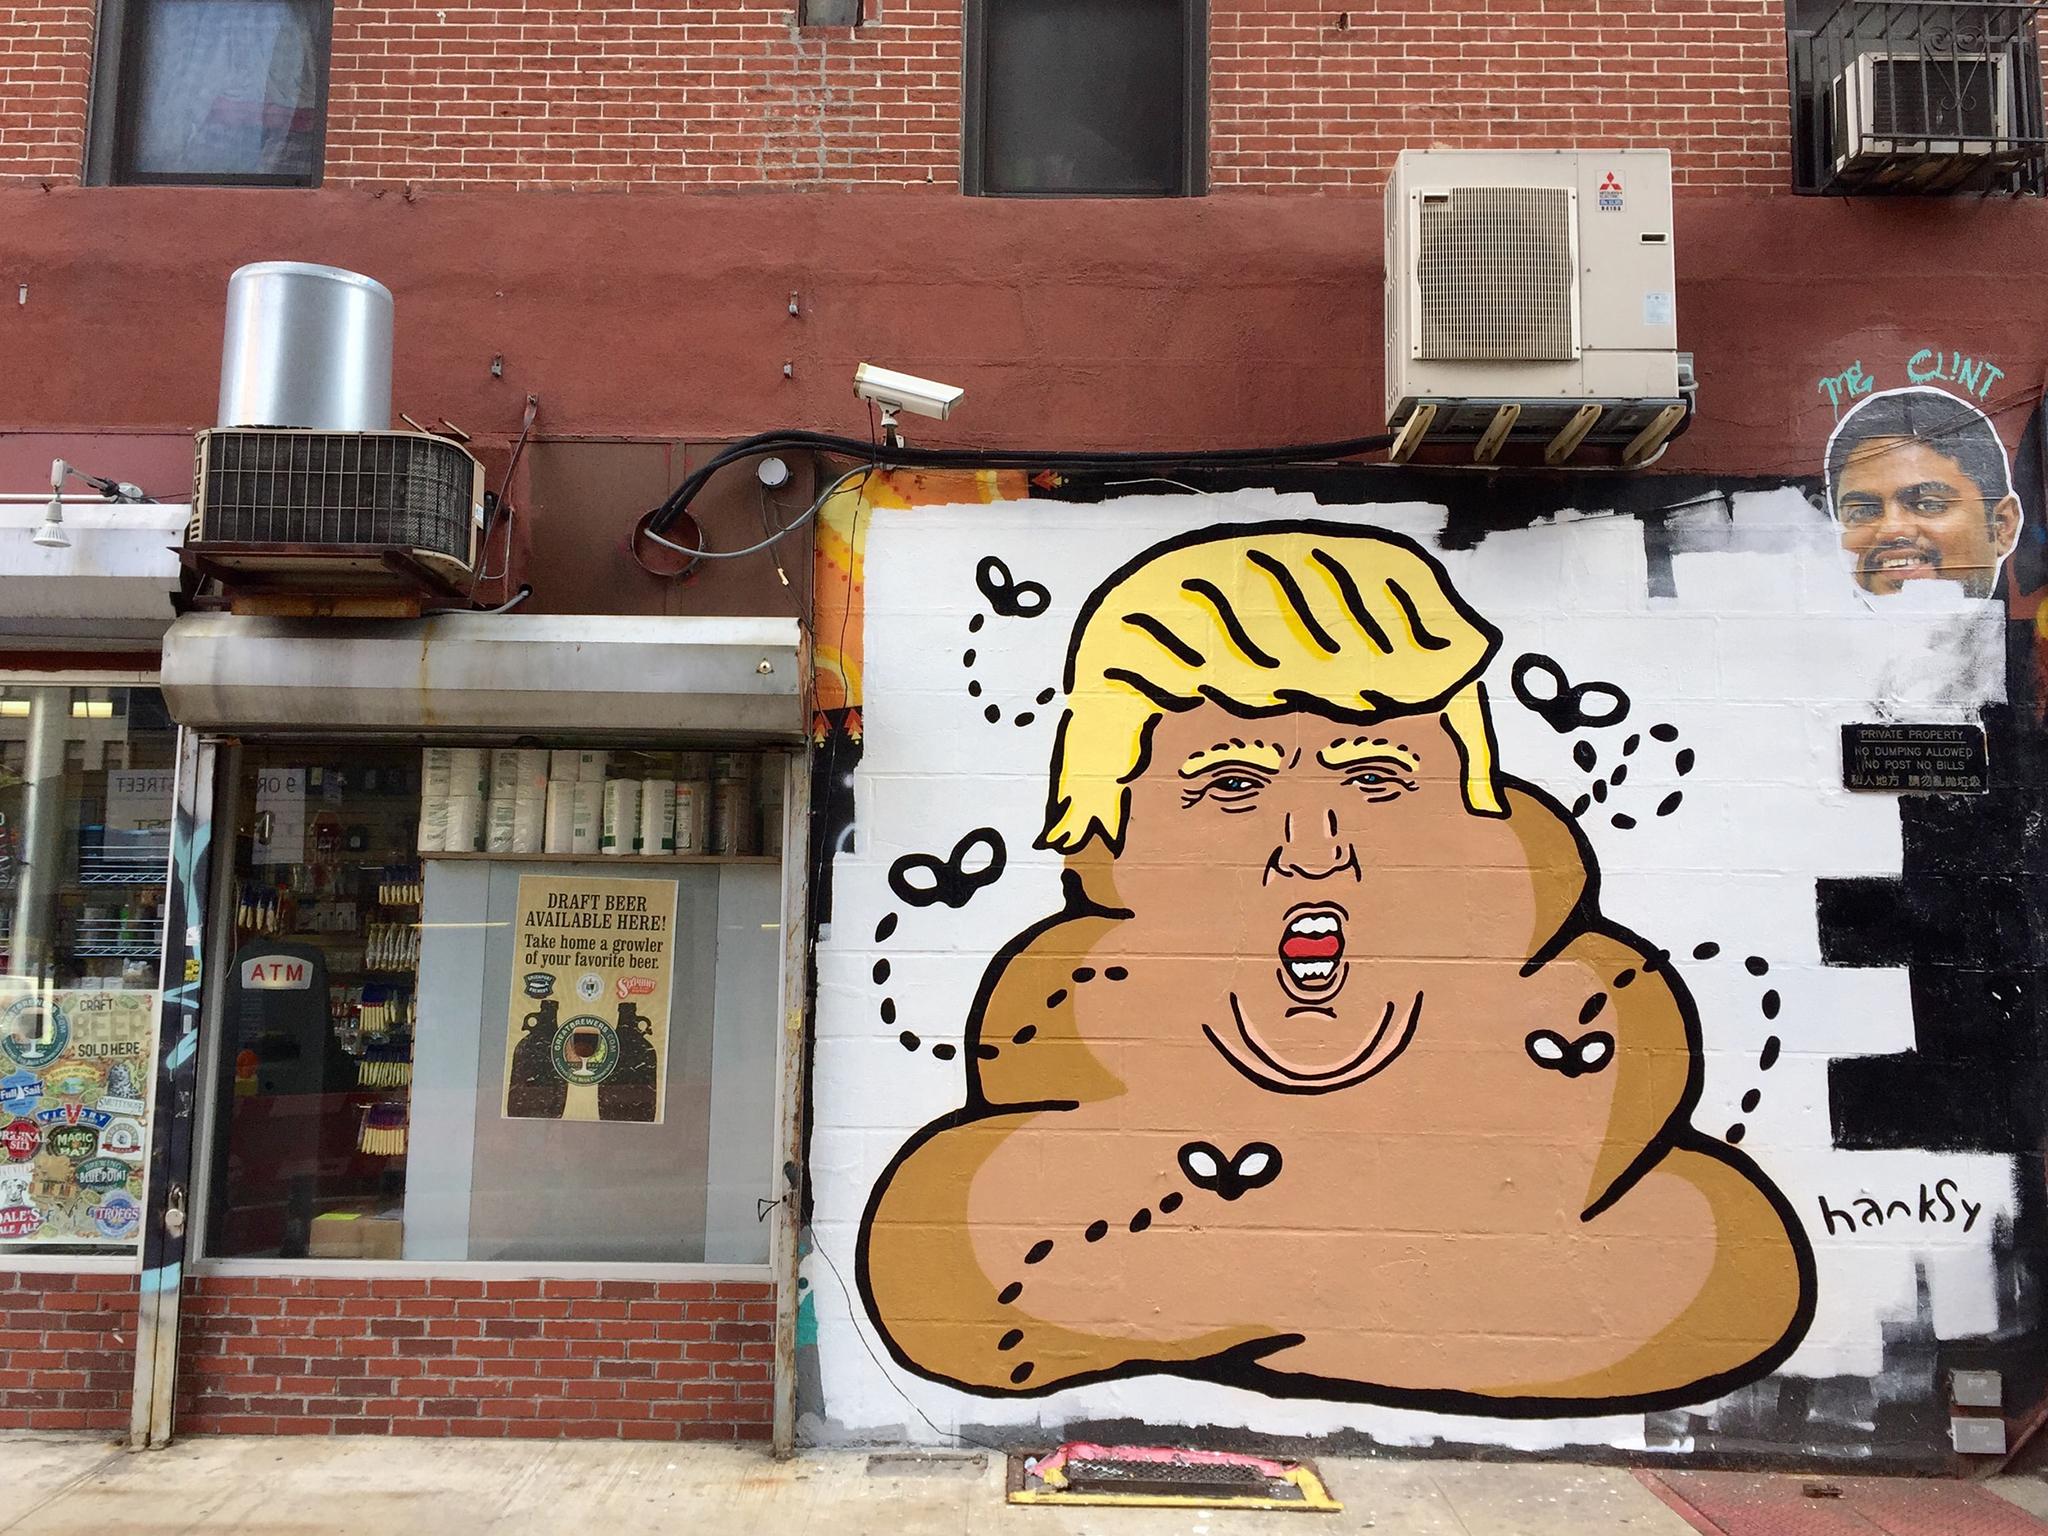 Hanksy, the Banksy of the US, hasn’t held anything back with his interpretation of the Republican candidate